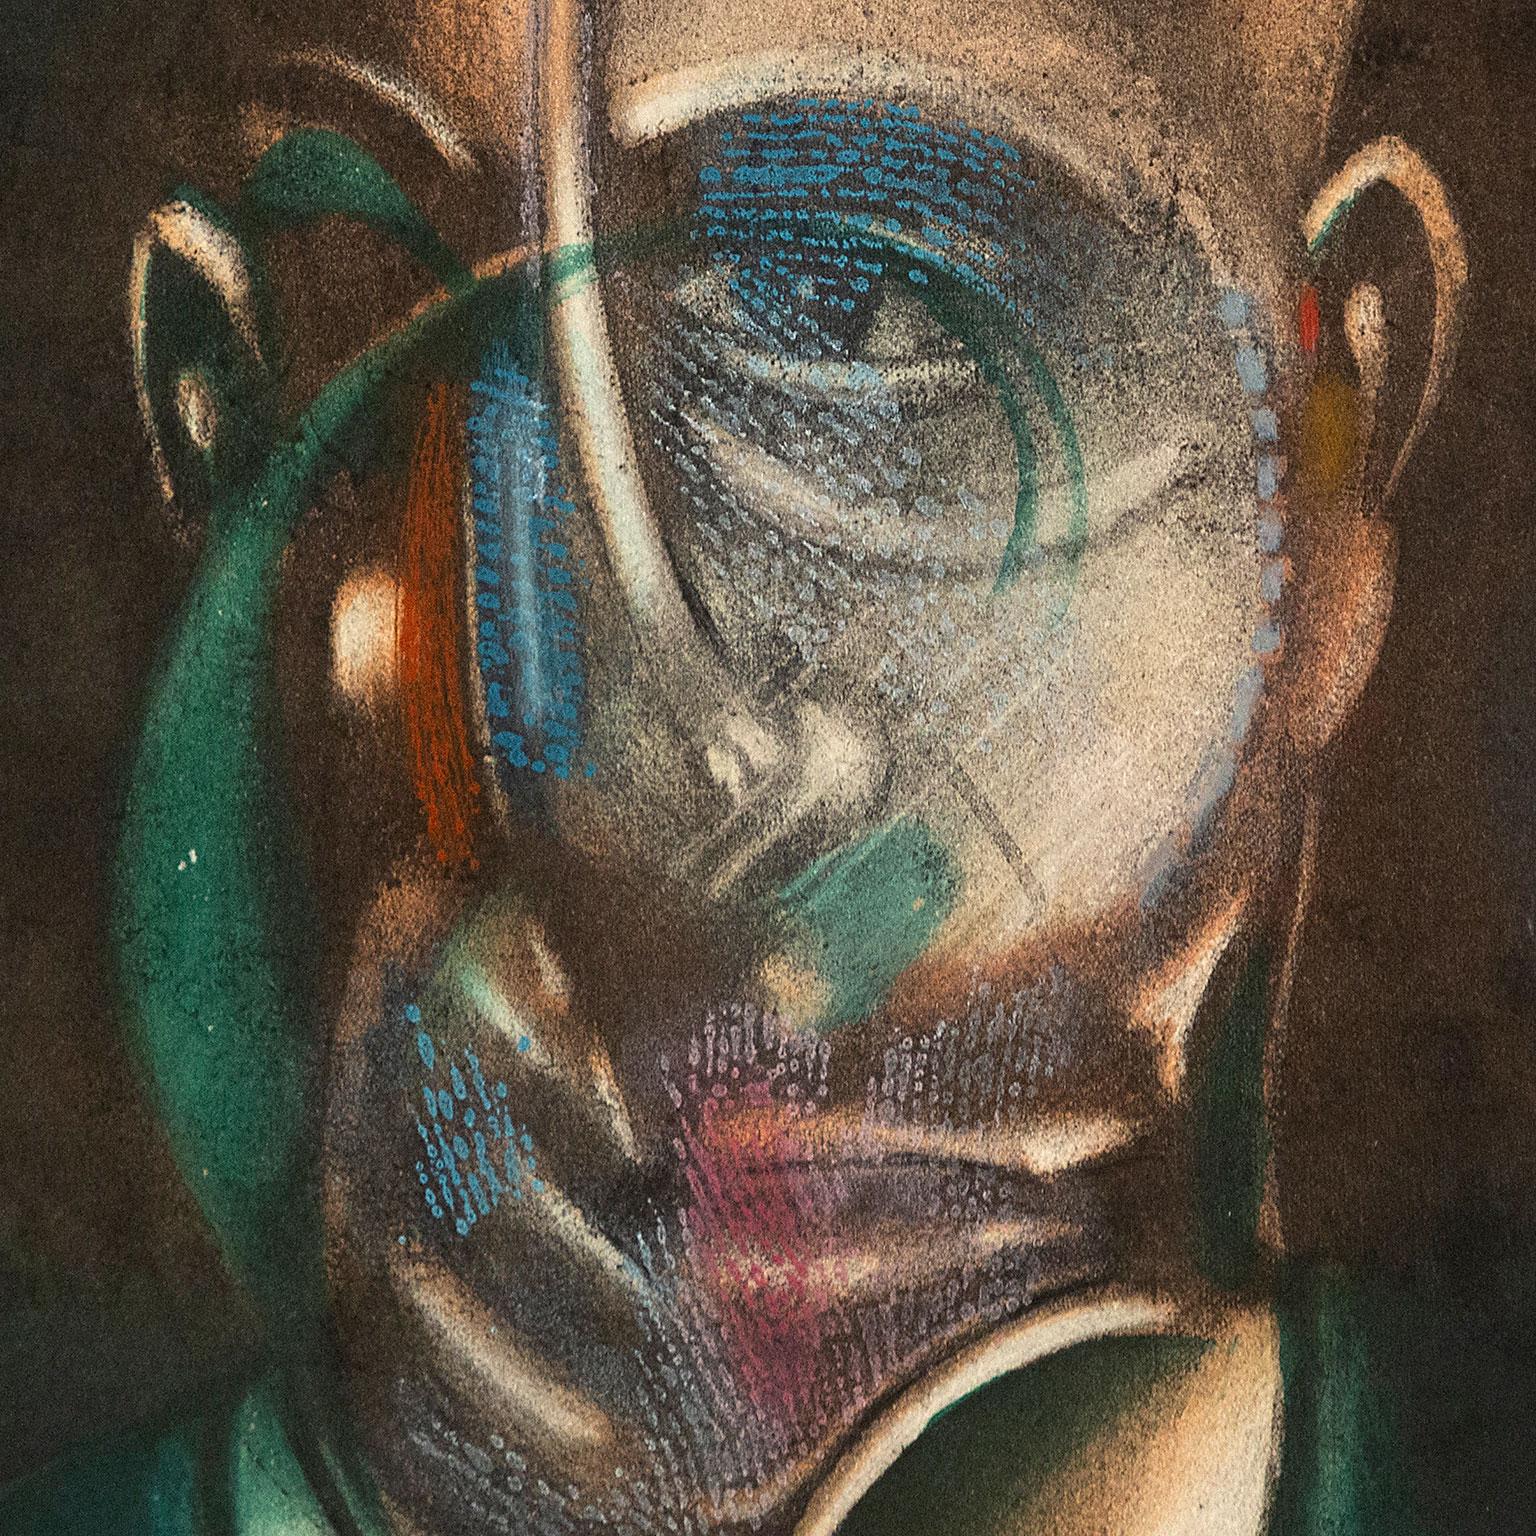 Portrait of Michel Leiris - Expressionist Print by Francis Bacon